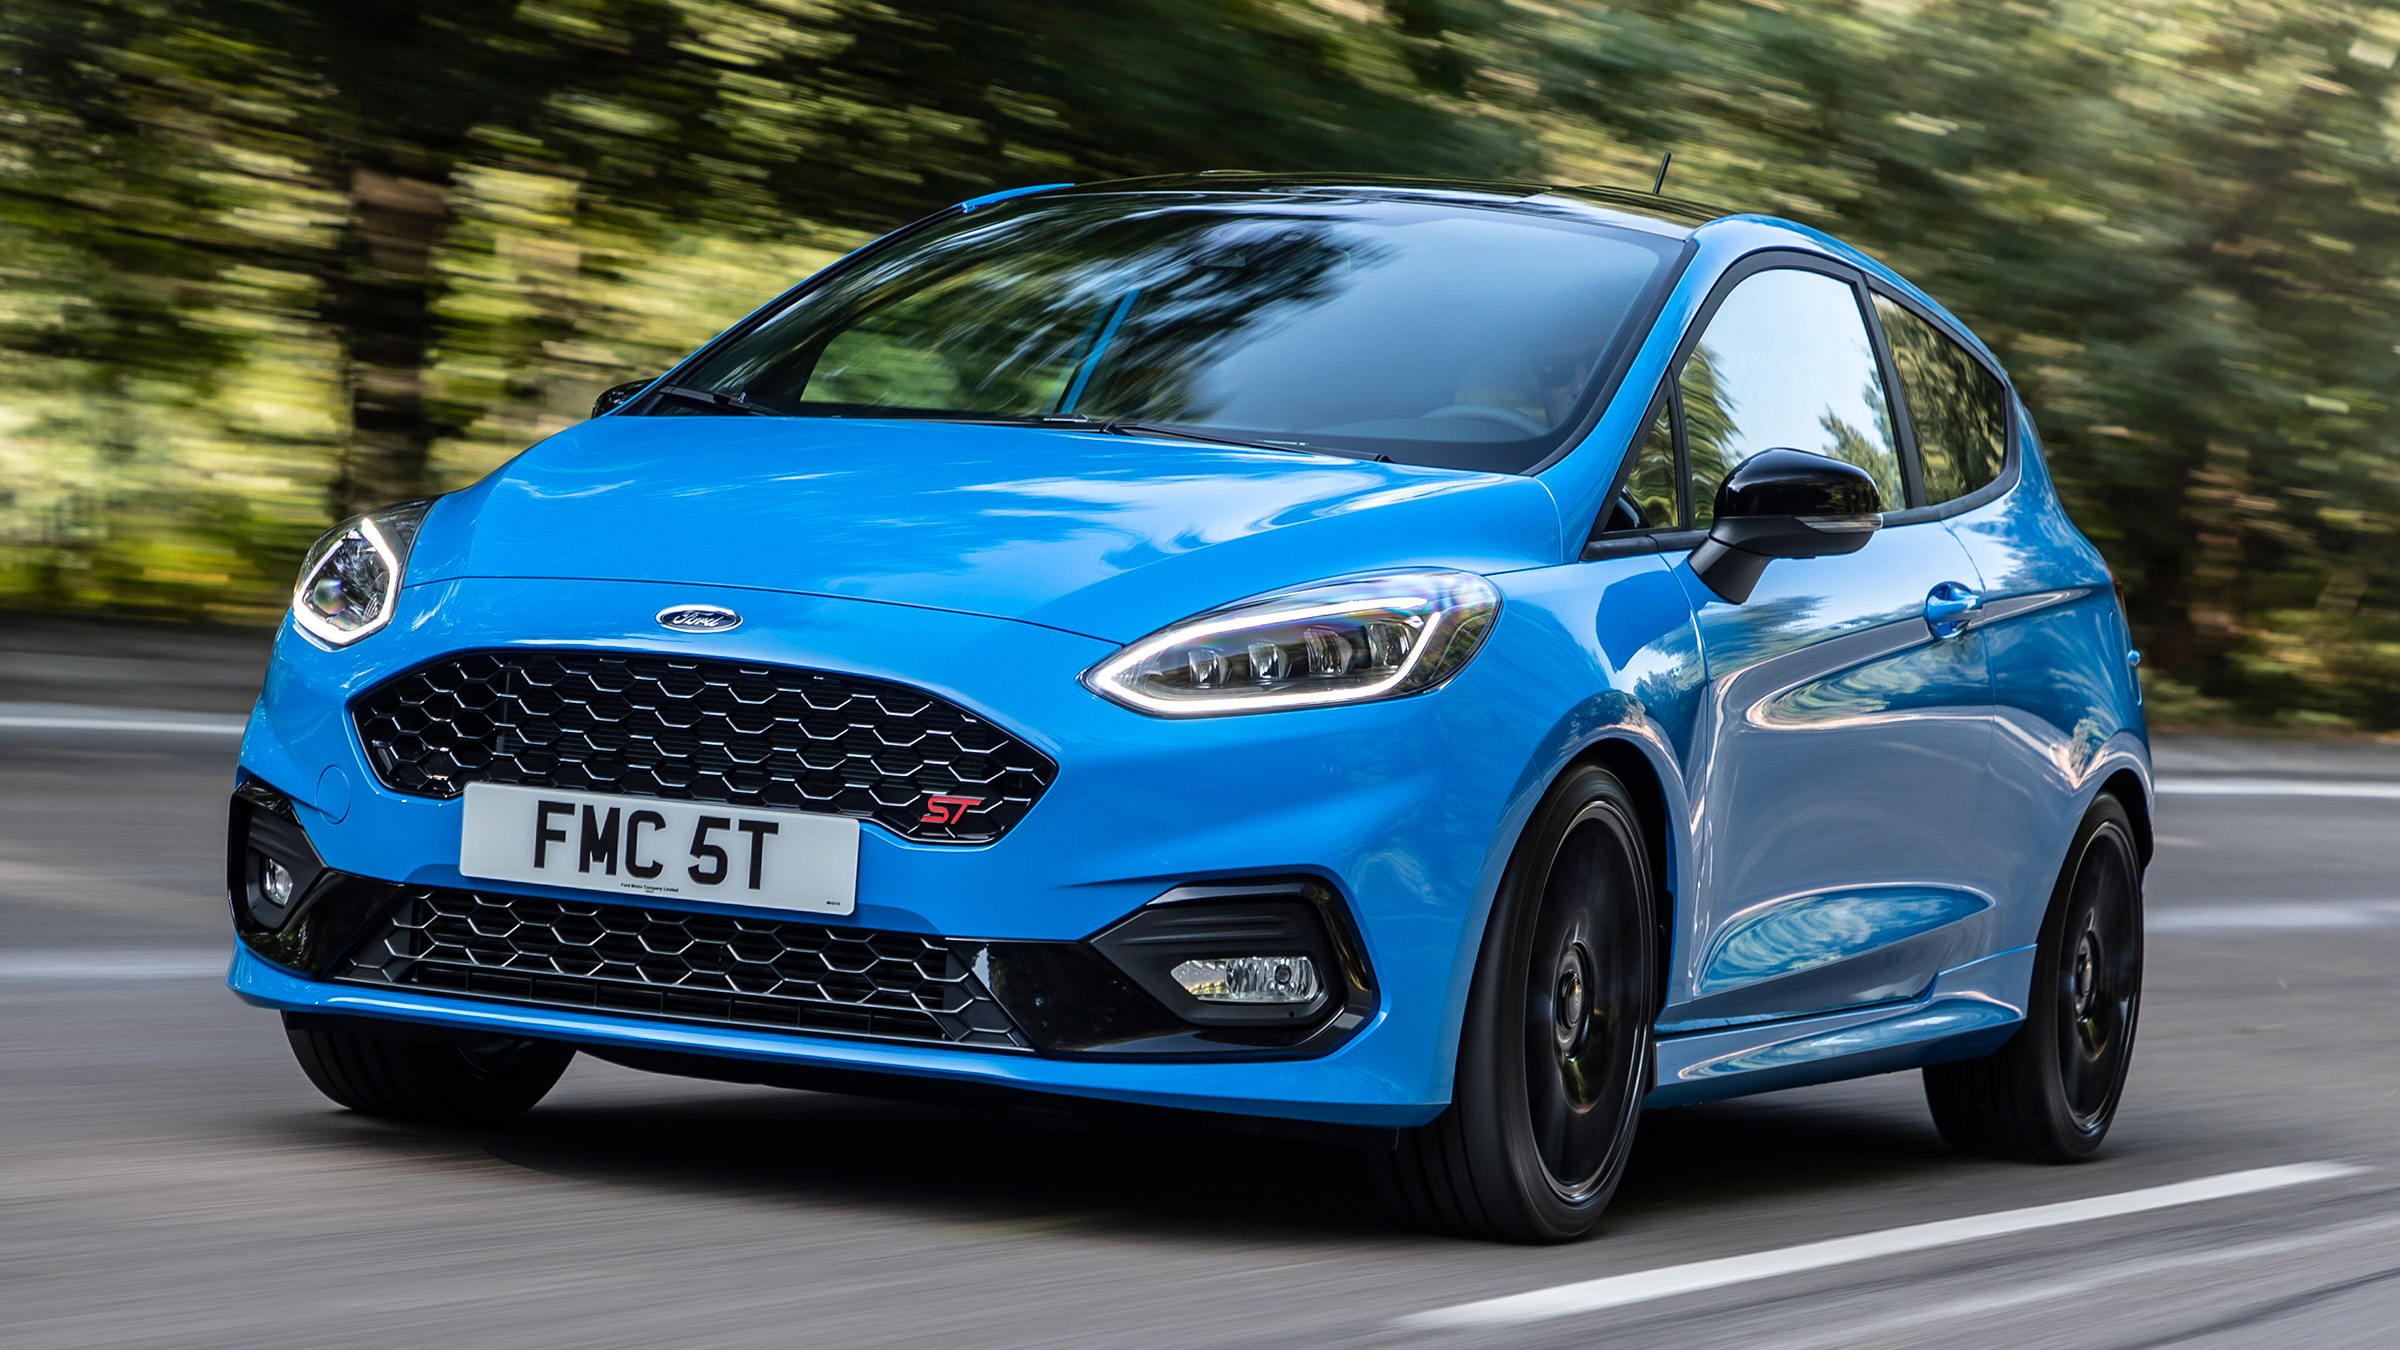 New limited Ford Fiesta ST Edition launched Auto Express